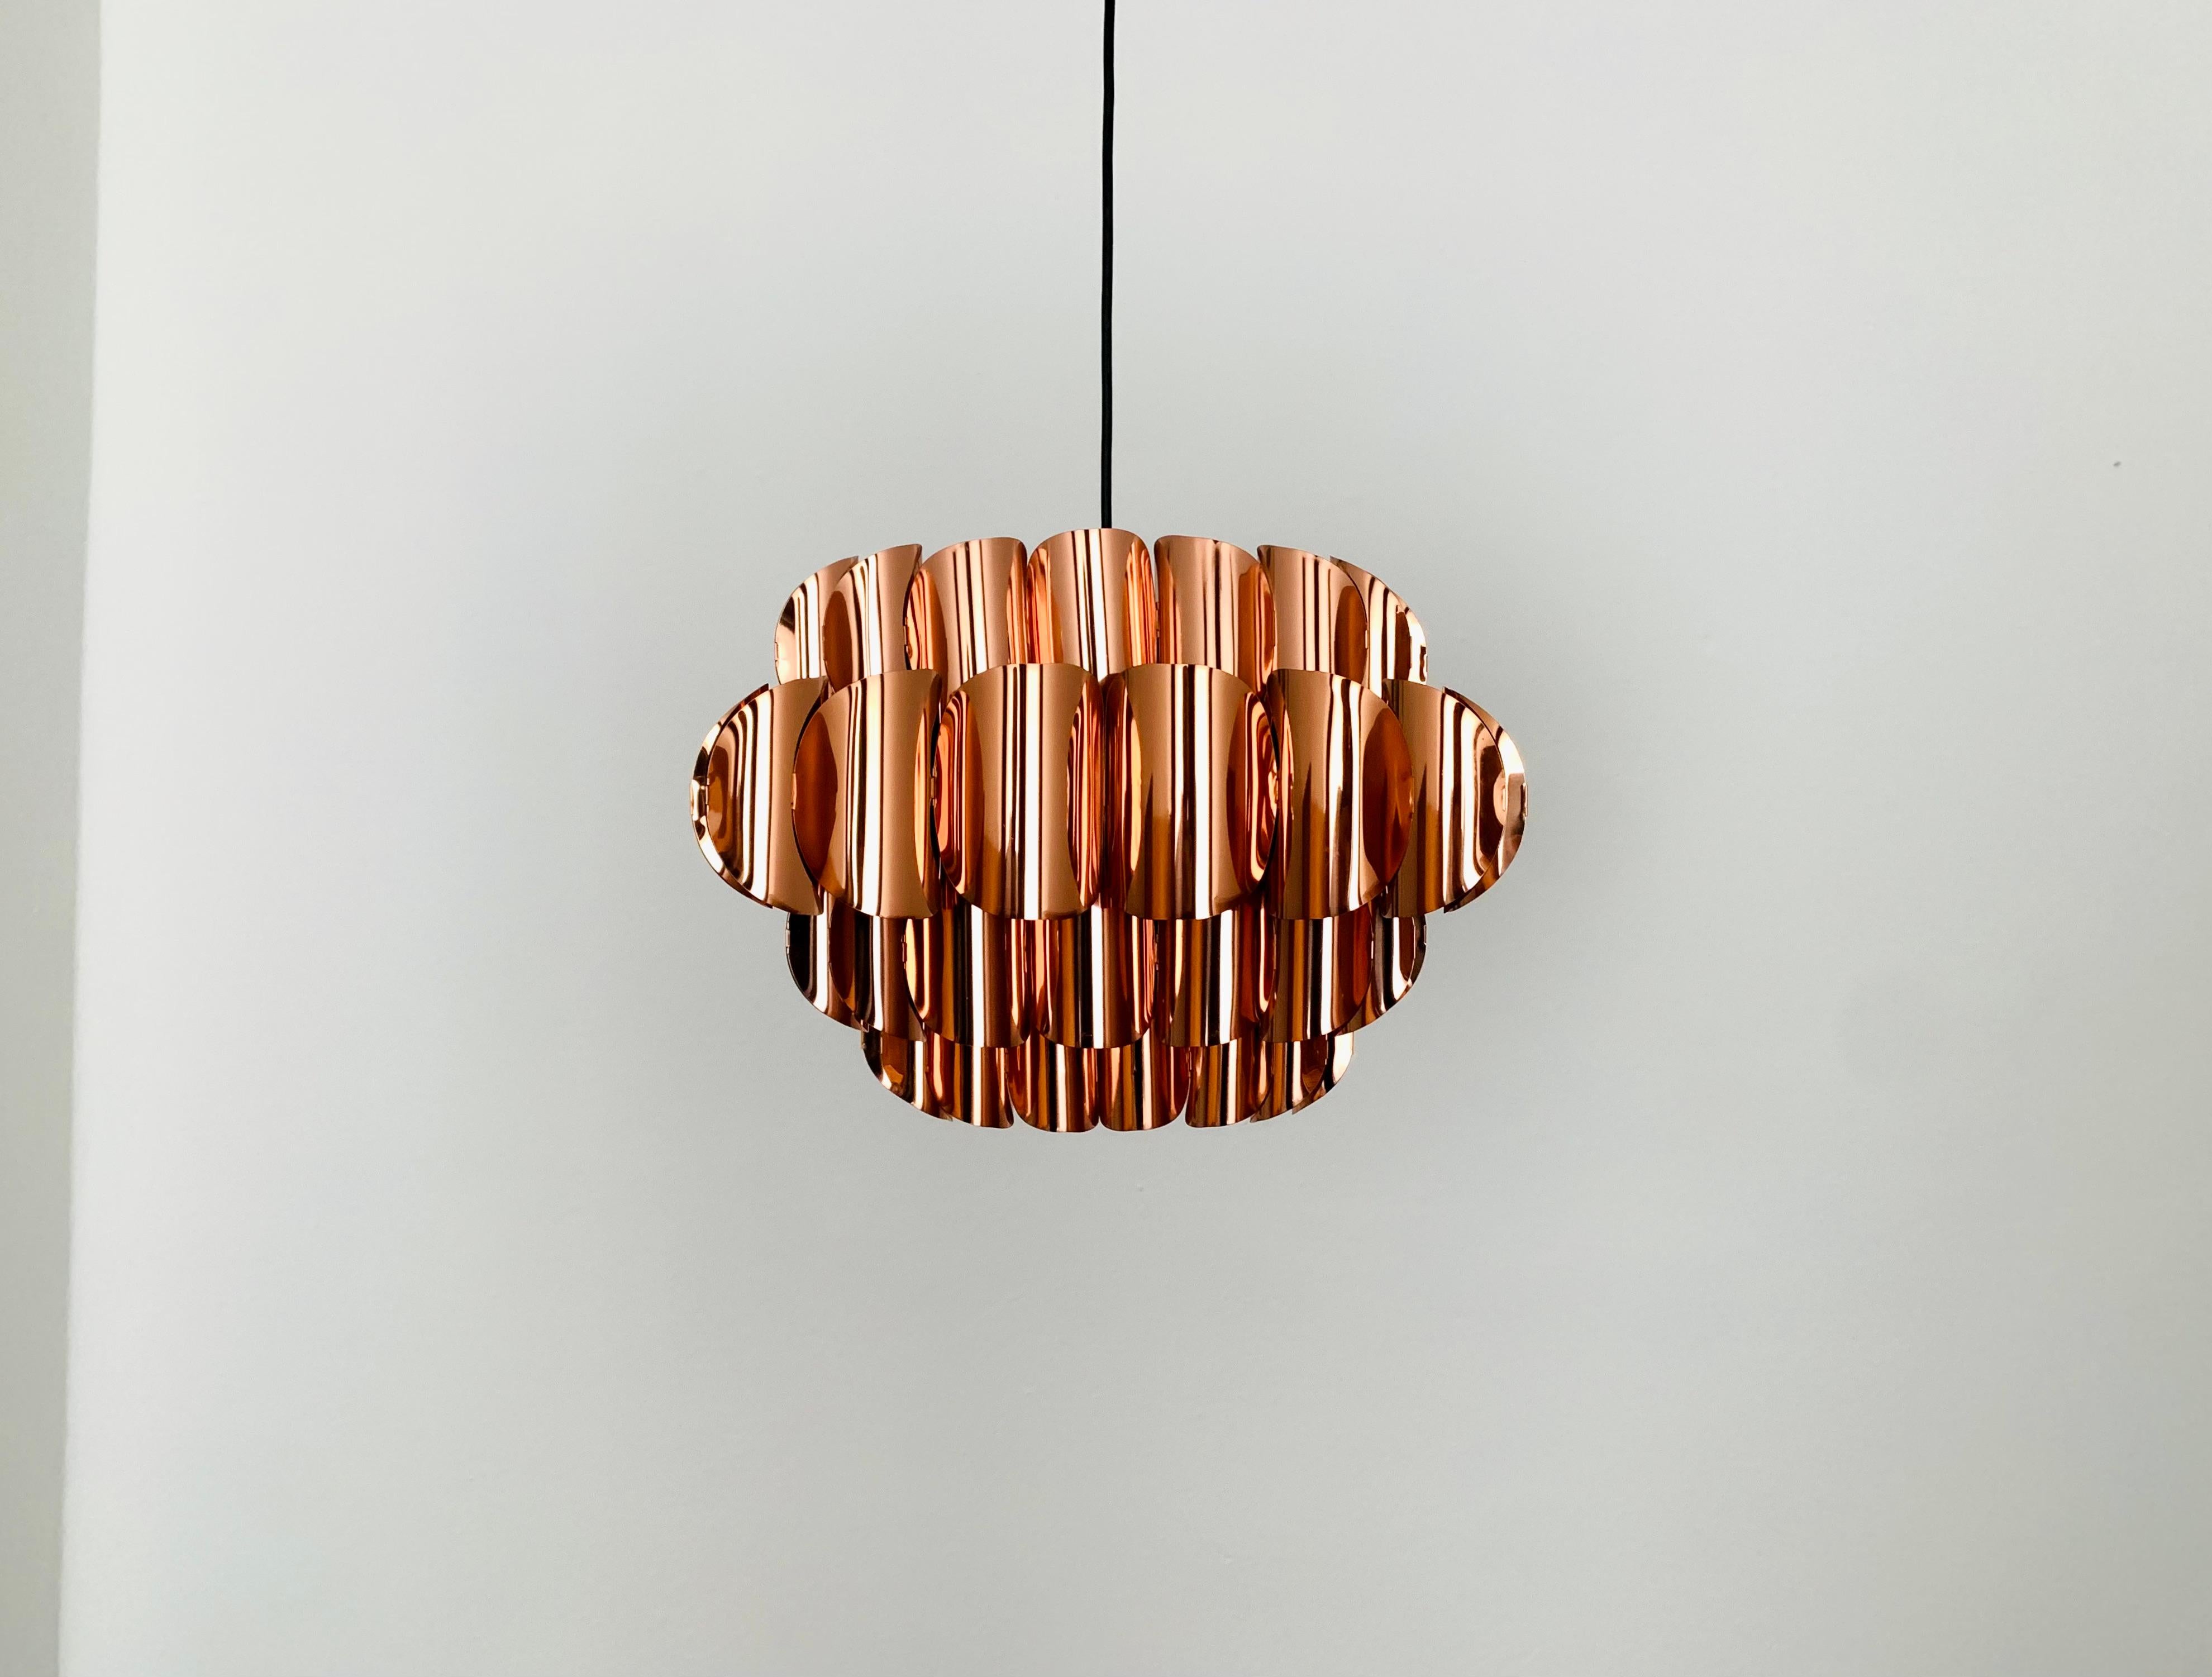 Wonderful copper pendant light by Thorsten Orrling from the 1960s.
Due to the extraordinary design and the great workmanship, the copper sparkles particularly beautifully.
The slats in 4 rows create a spectacular play of light in the